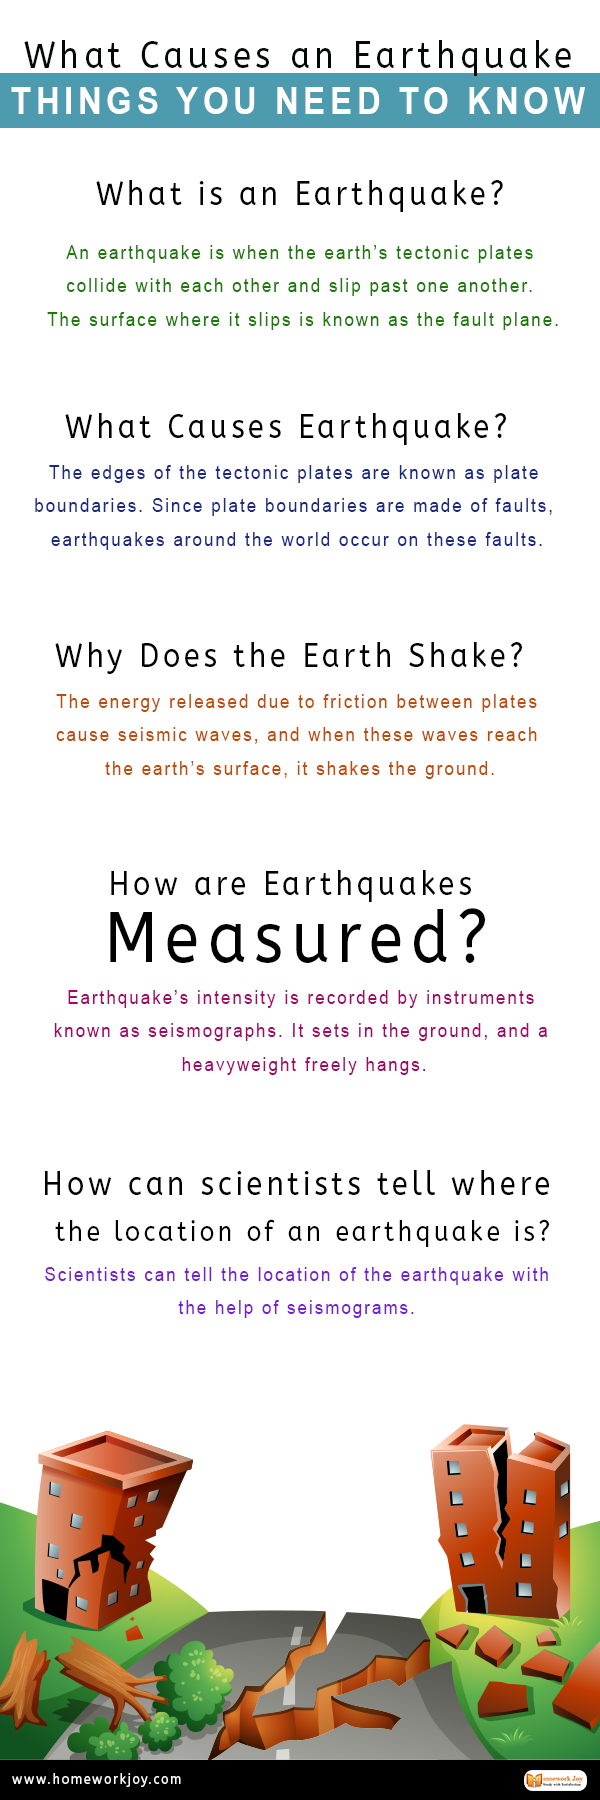 What-Causes-an-Earthquake-Things-You-Need-To-Know (1)